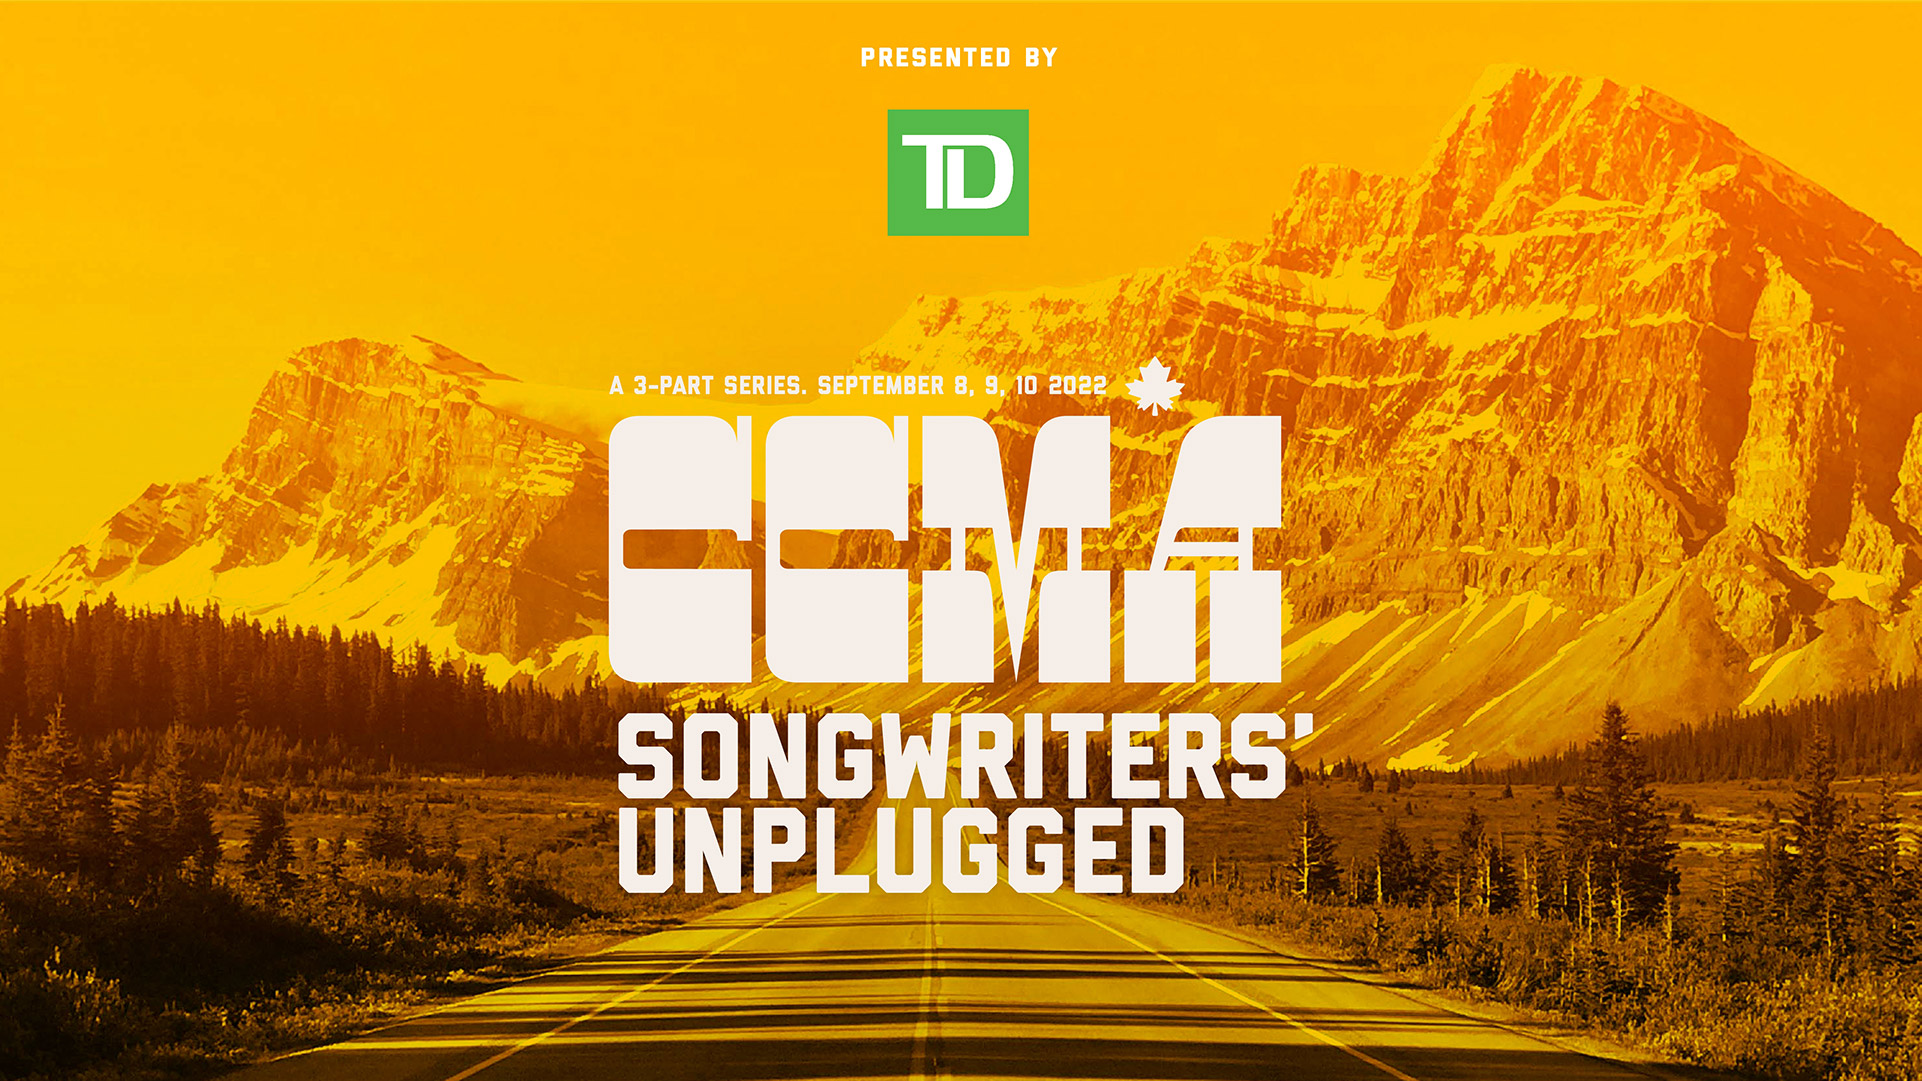 CCMA Songwriters Unplugged